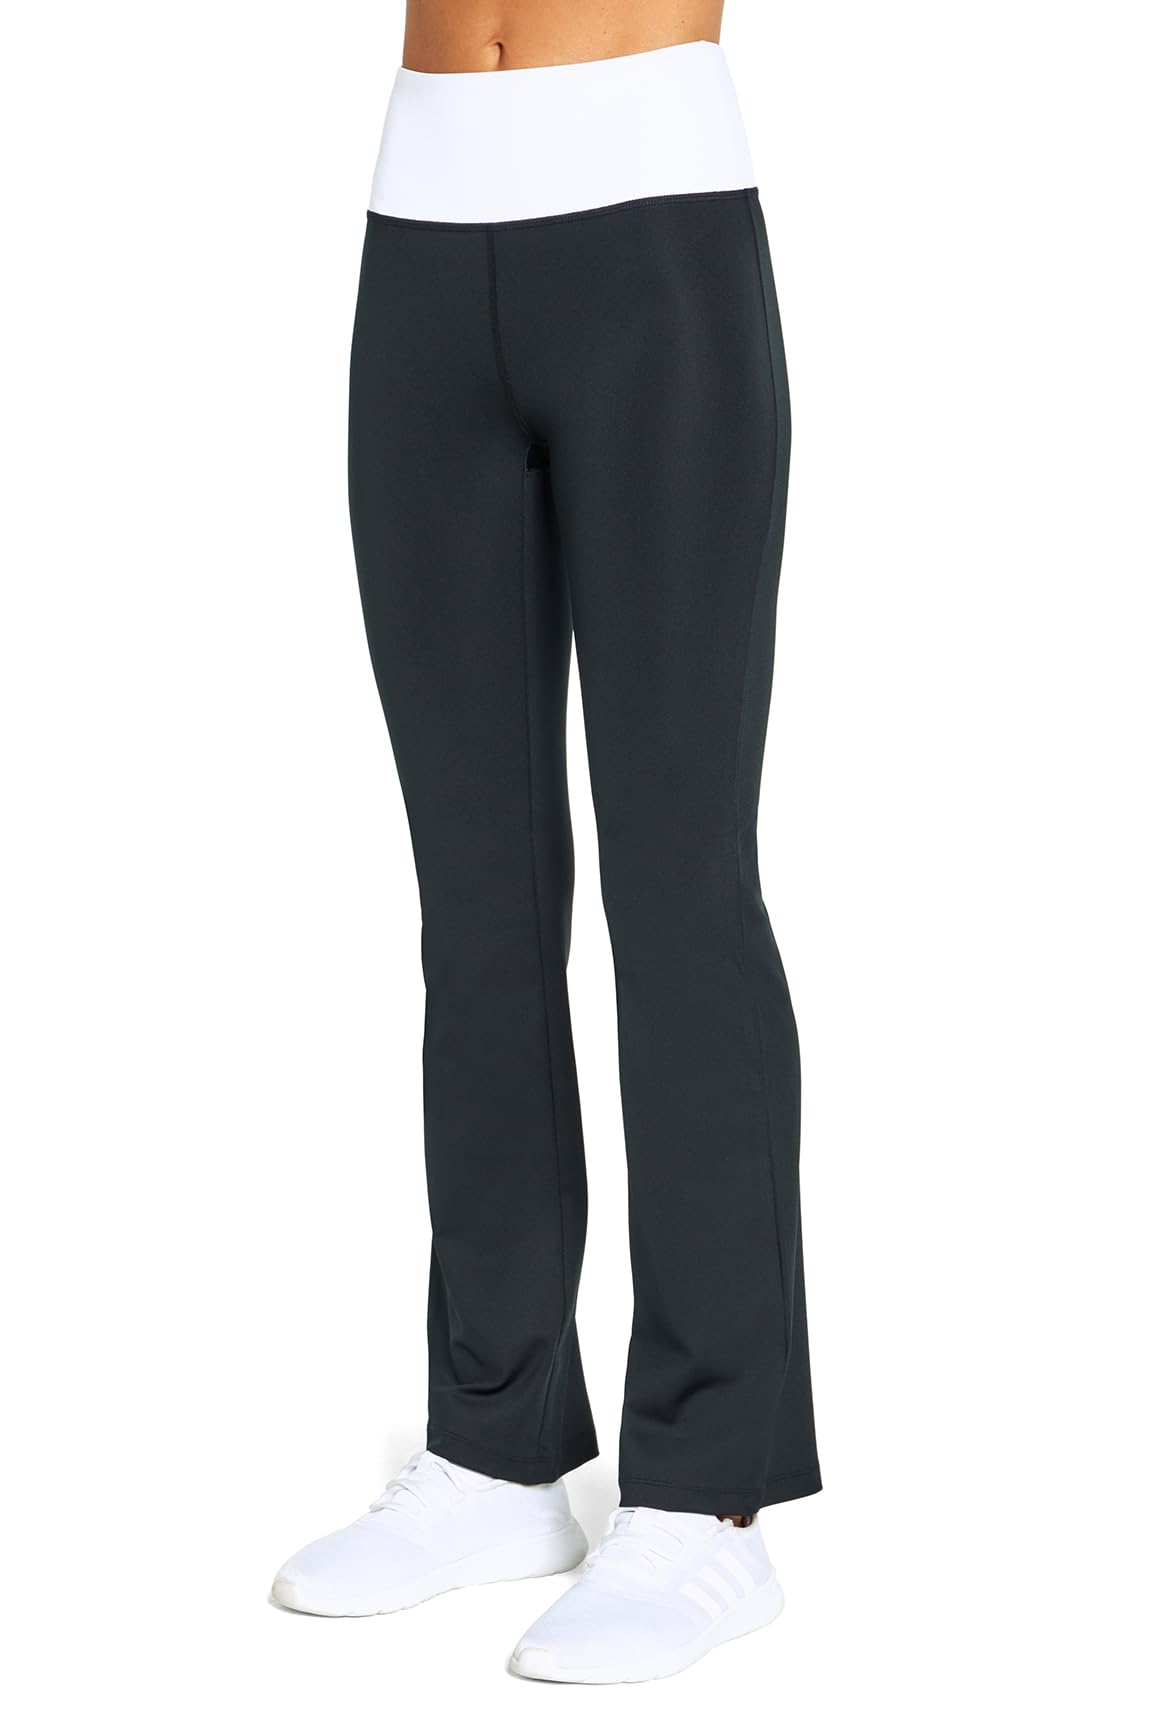 Bally Total Fitness Women's Colorblock High Rise Flare Pant